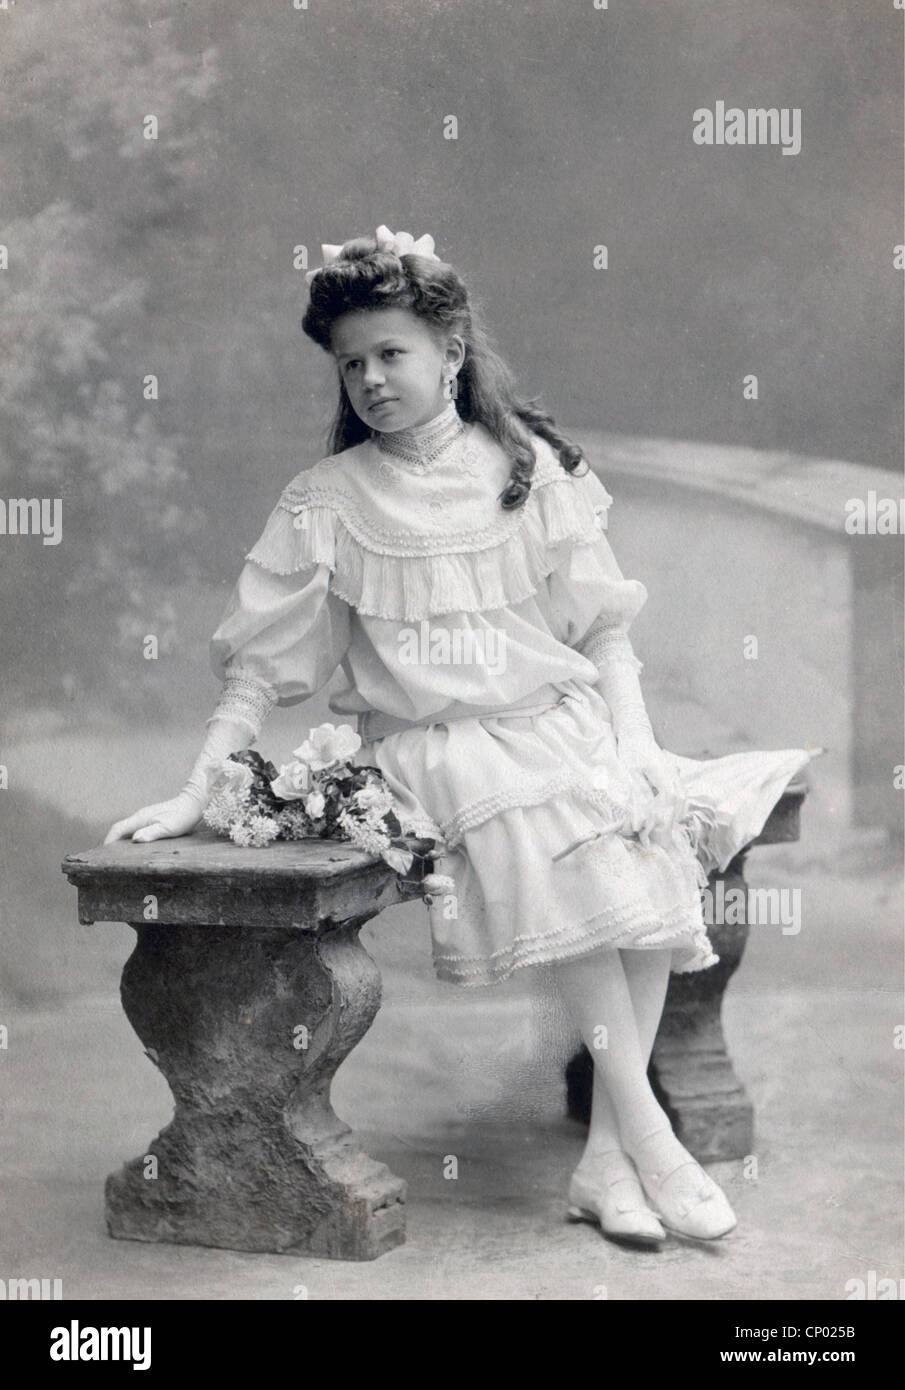 people, children, girl in frilly dress, circa 1900, Additional-Rights-Clearences-Not Available Stock Photo